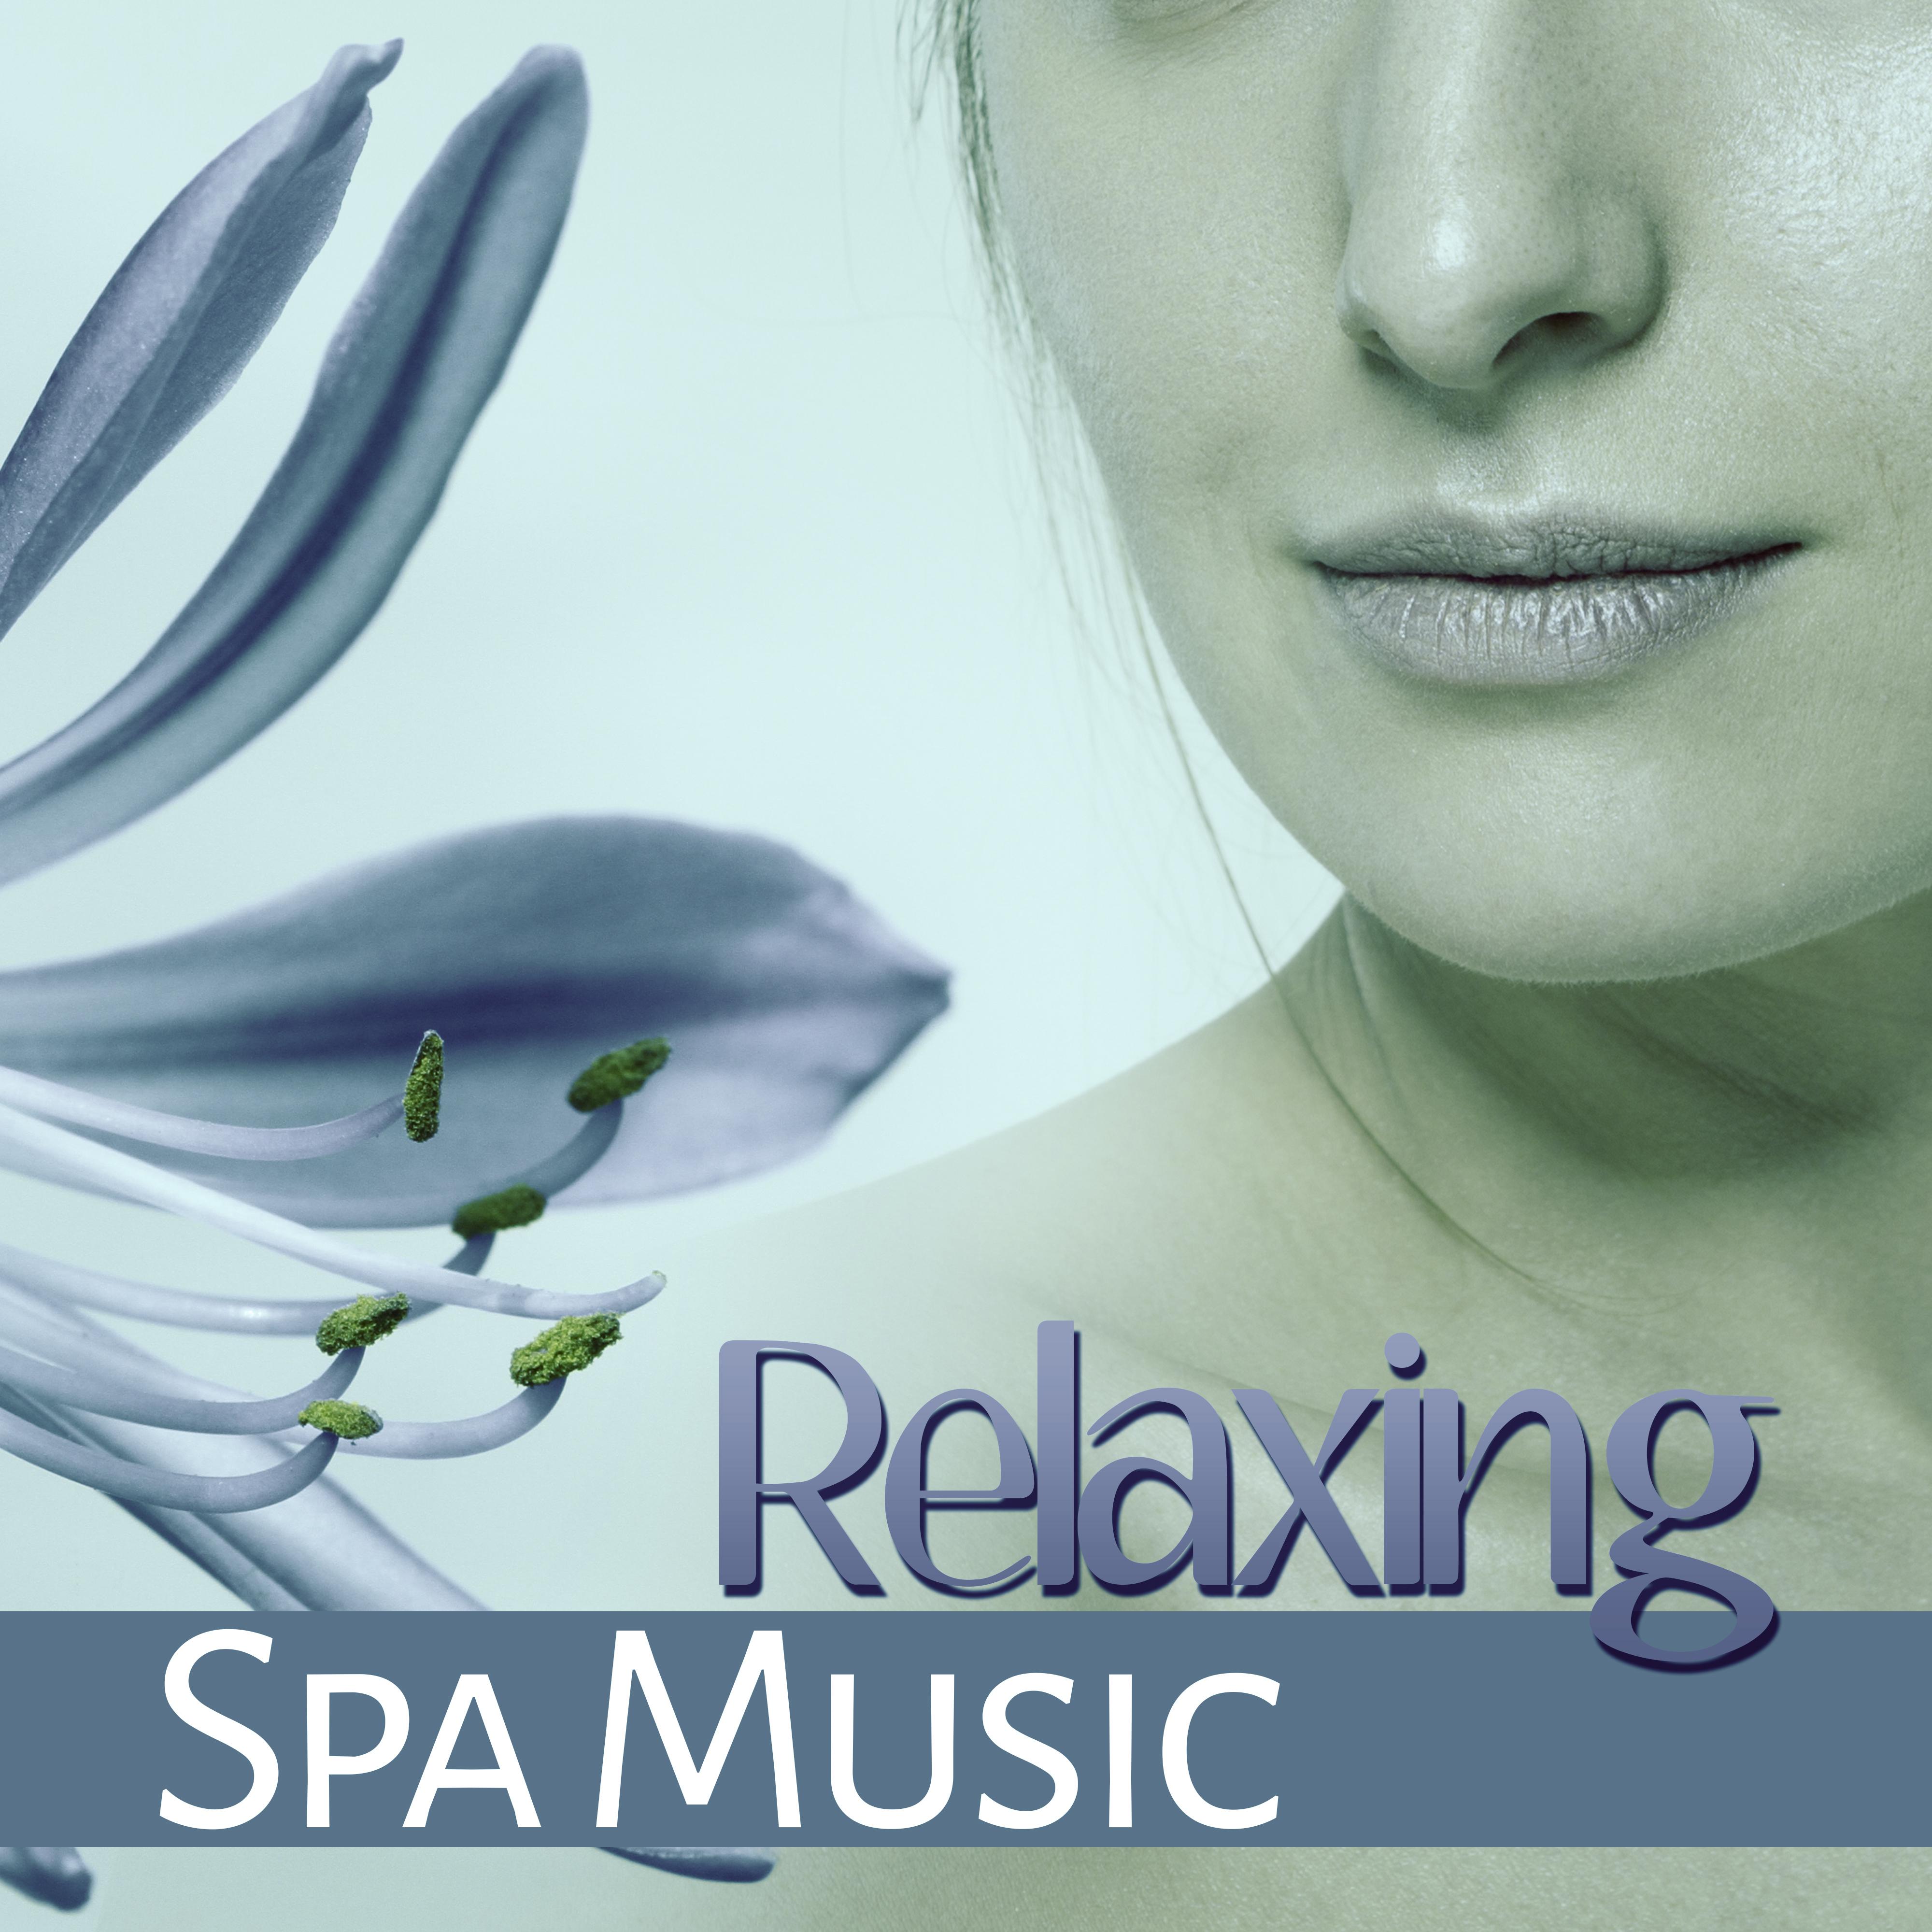 Relaxing Spa Music  Soothing Rain, Gentle Sounds of Nature, Deep Sleep, Dreams, Soft Rain for Wellness, Pure Massage, Better Mood